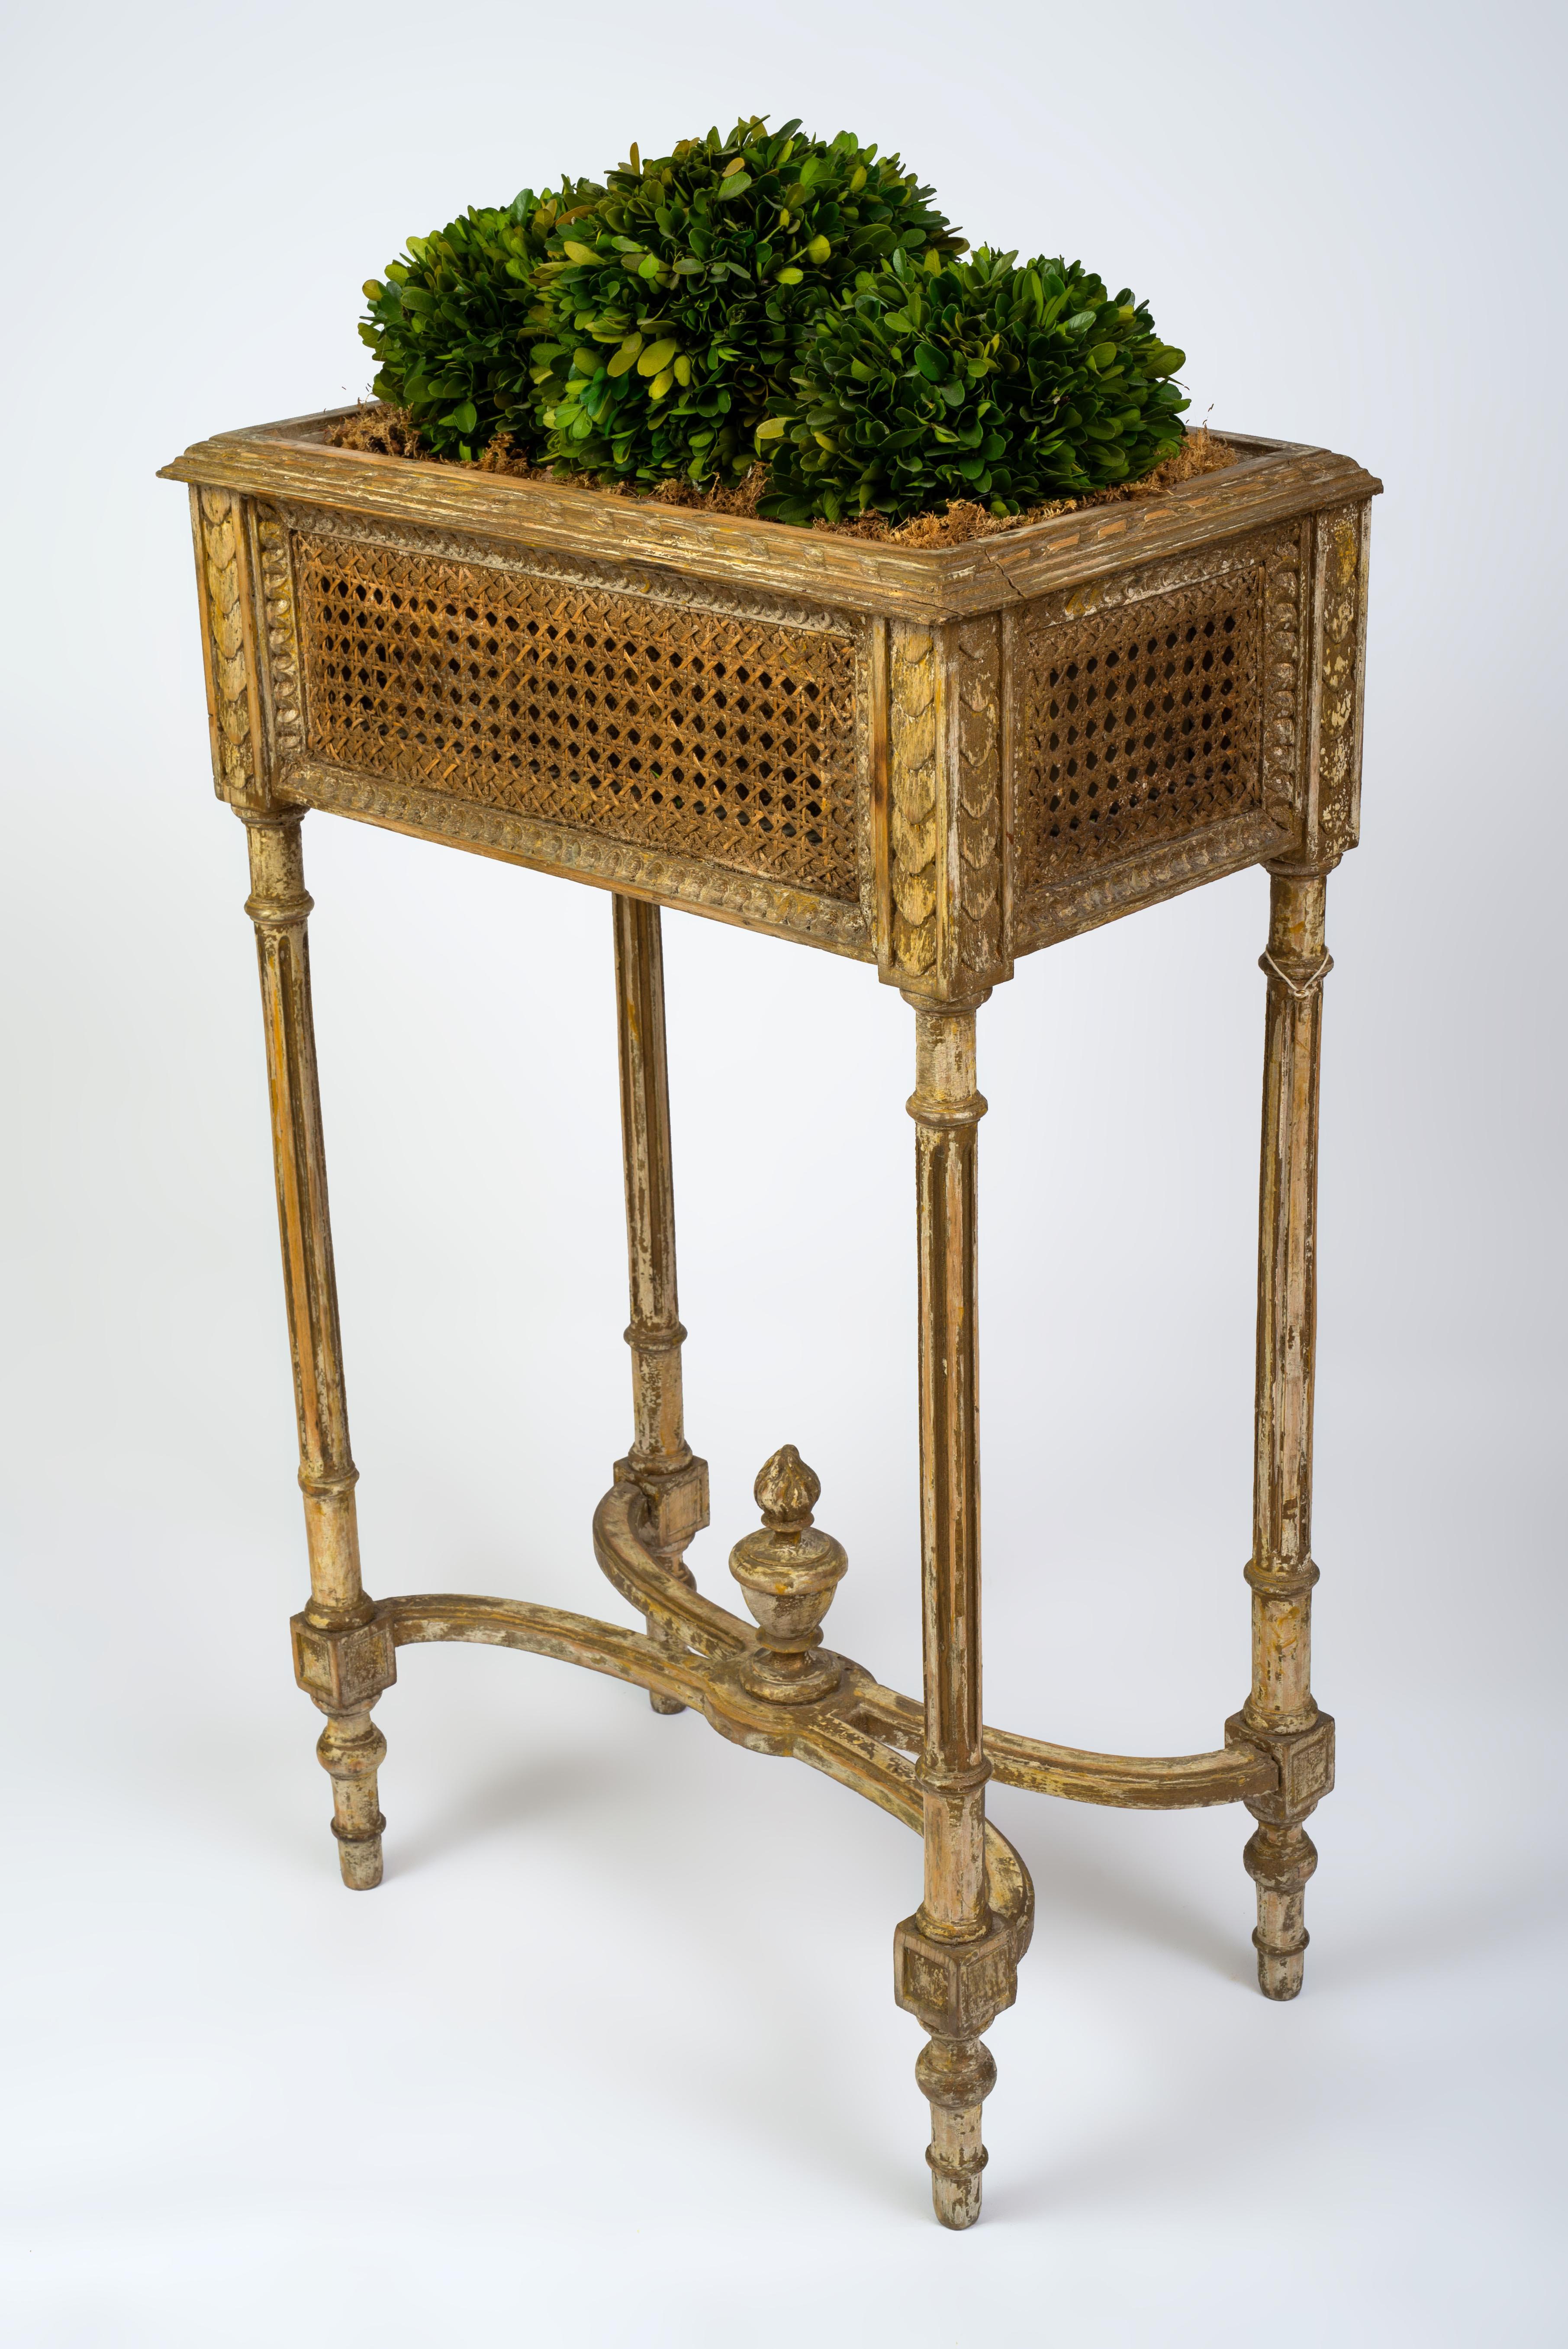 The rectangular caned body above fluted legs joined by a stretcher centered by a flame finial. Filled with faux moss and shrubbery. Height of the planter without the plants is 32in; with the plants, it is approximately 37in.